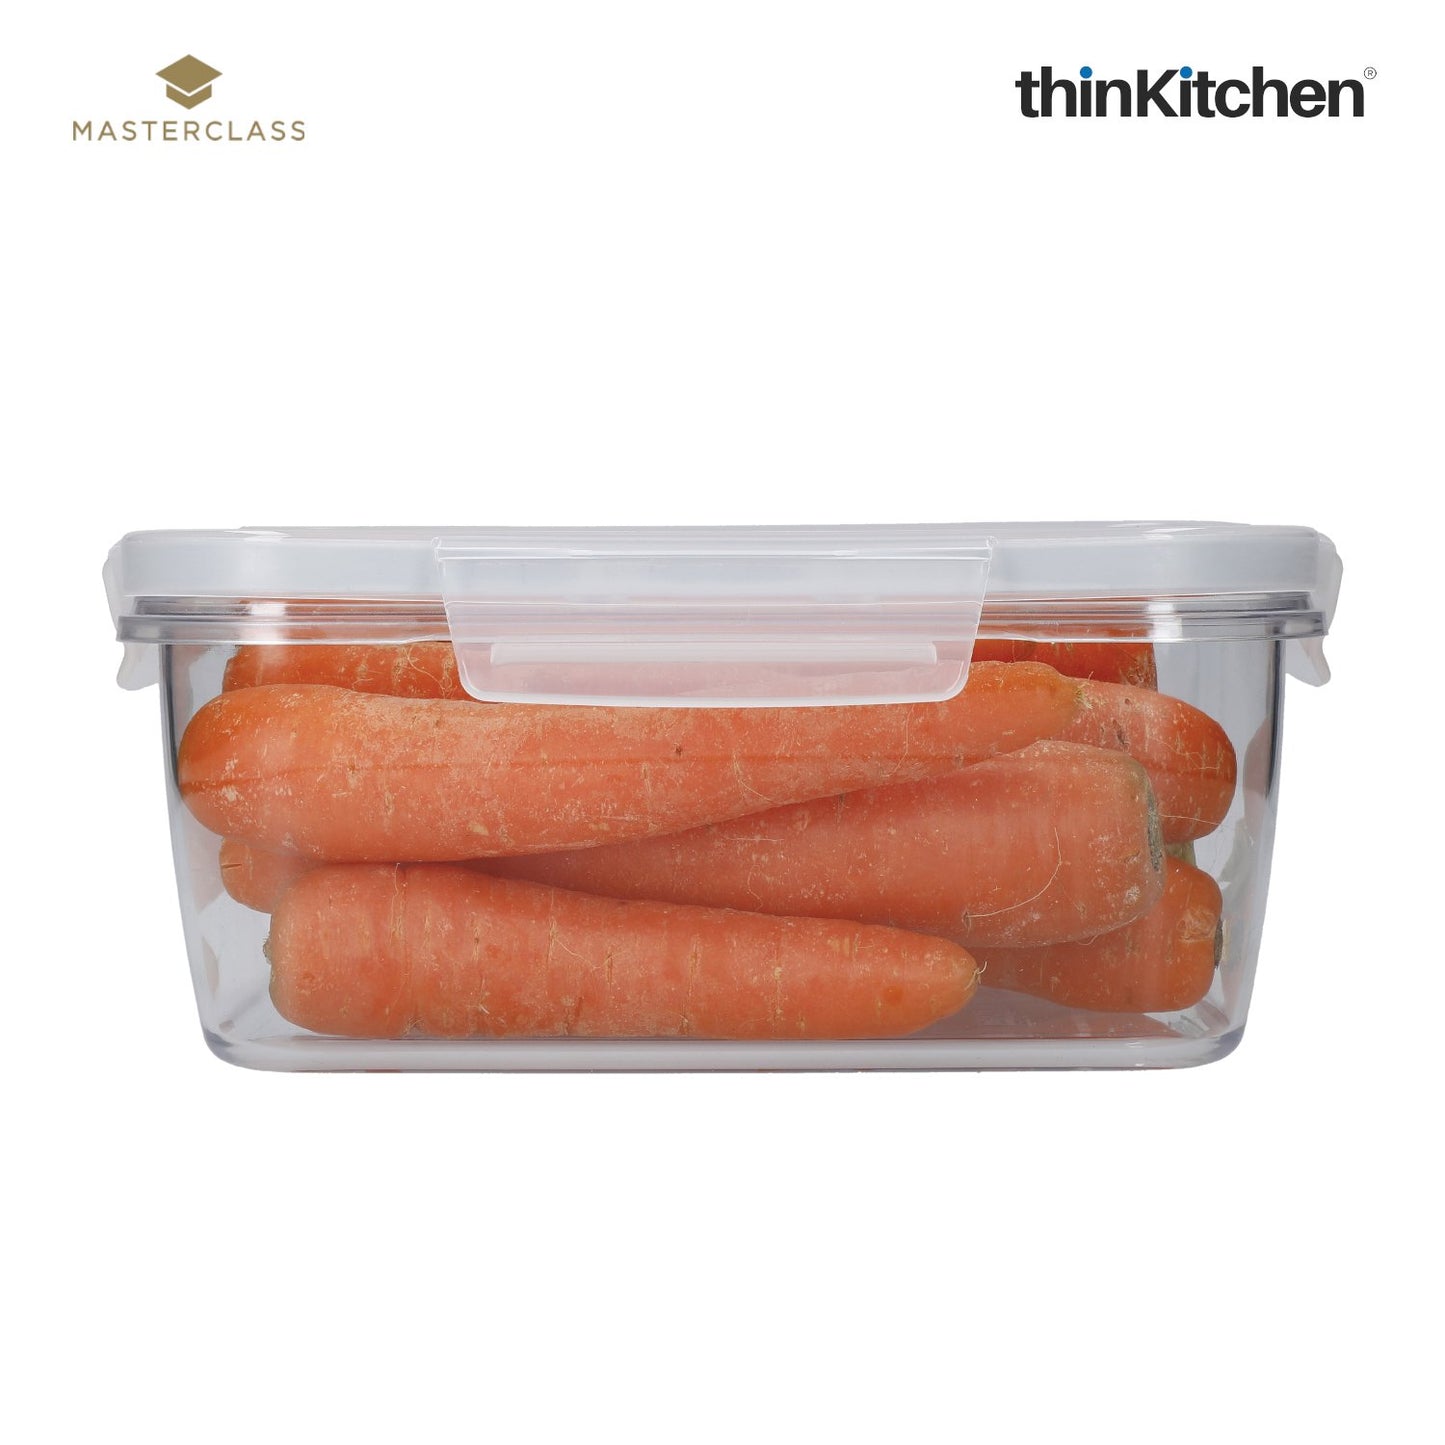 MasterClass Recycled Eco Snap Food Storage Container, Rectangular, 1500ml